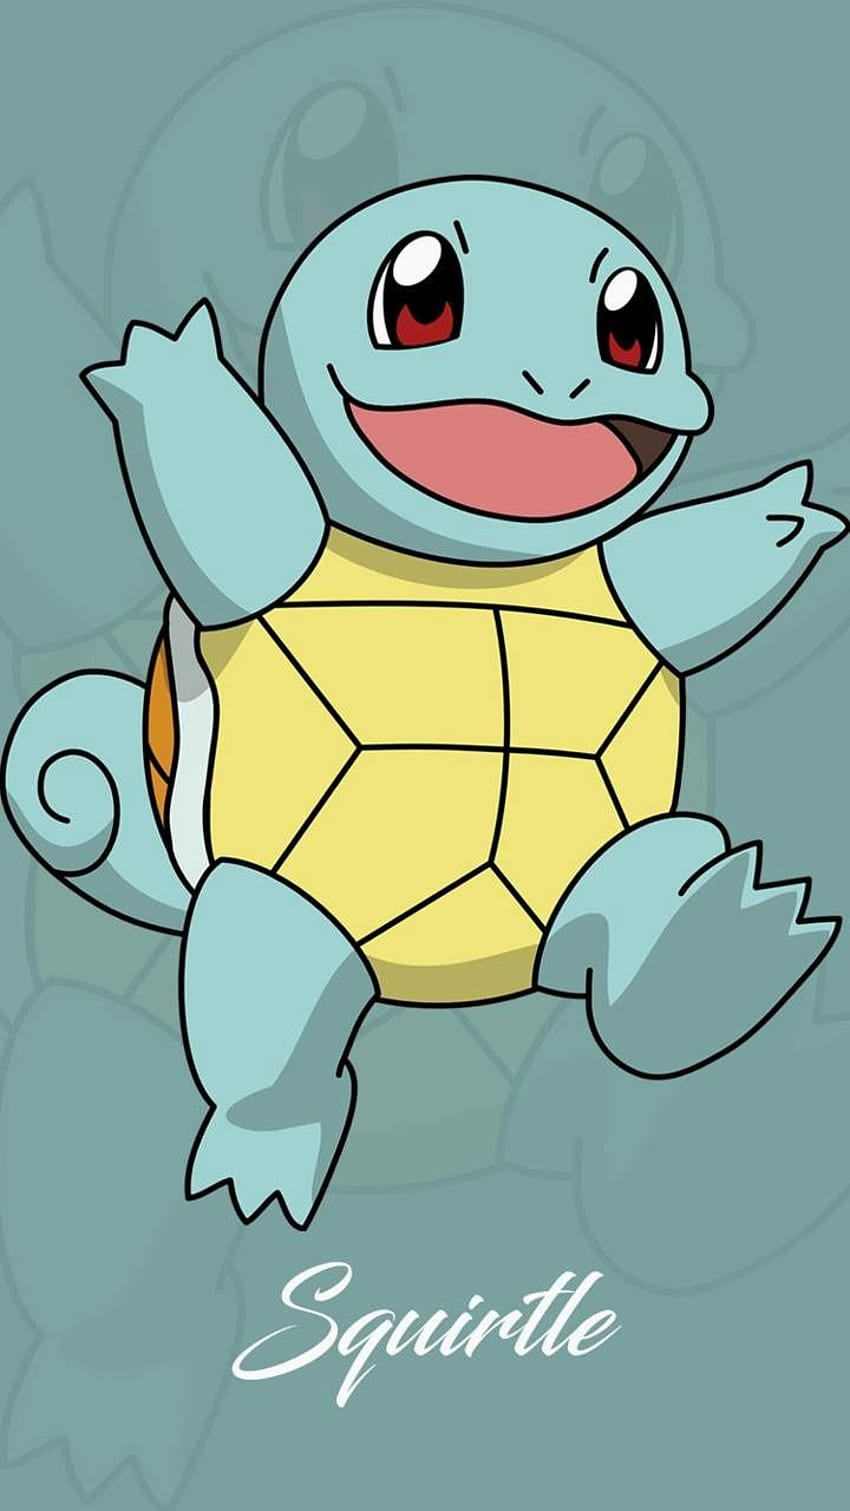 Squirtle - Pokemon Squirtle -, Squirtle Squad HD phone wallpaper